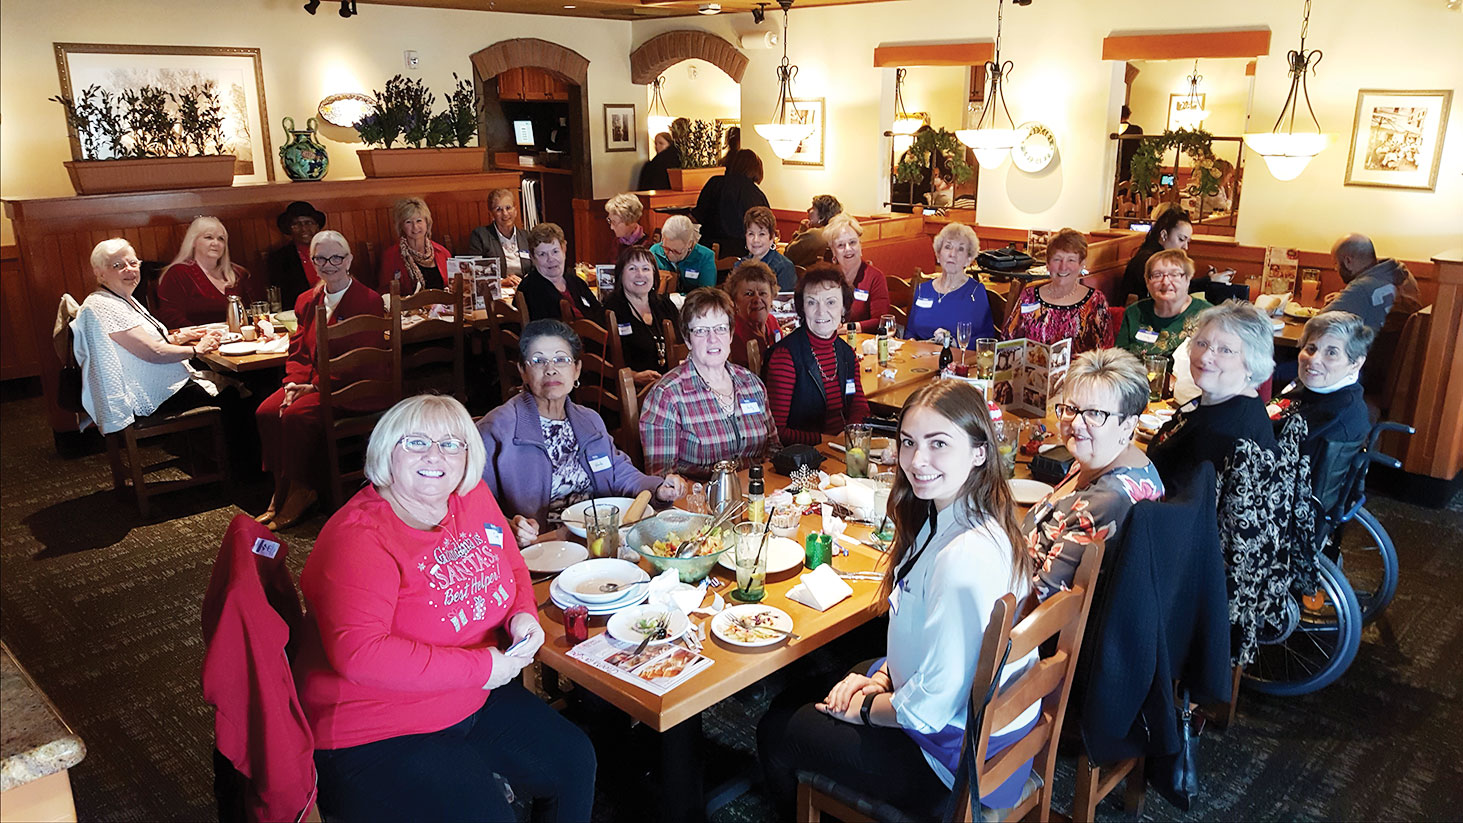 The ladies of Unit 20 enjoyed their annual Christmas luncheon at the Olive Garden.